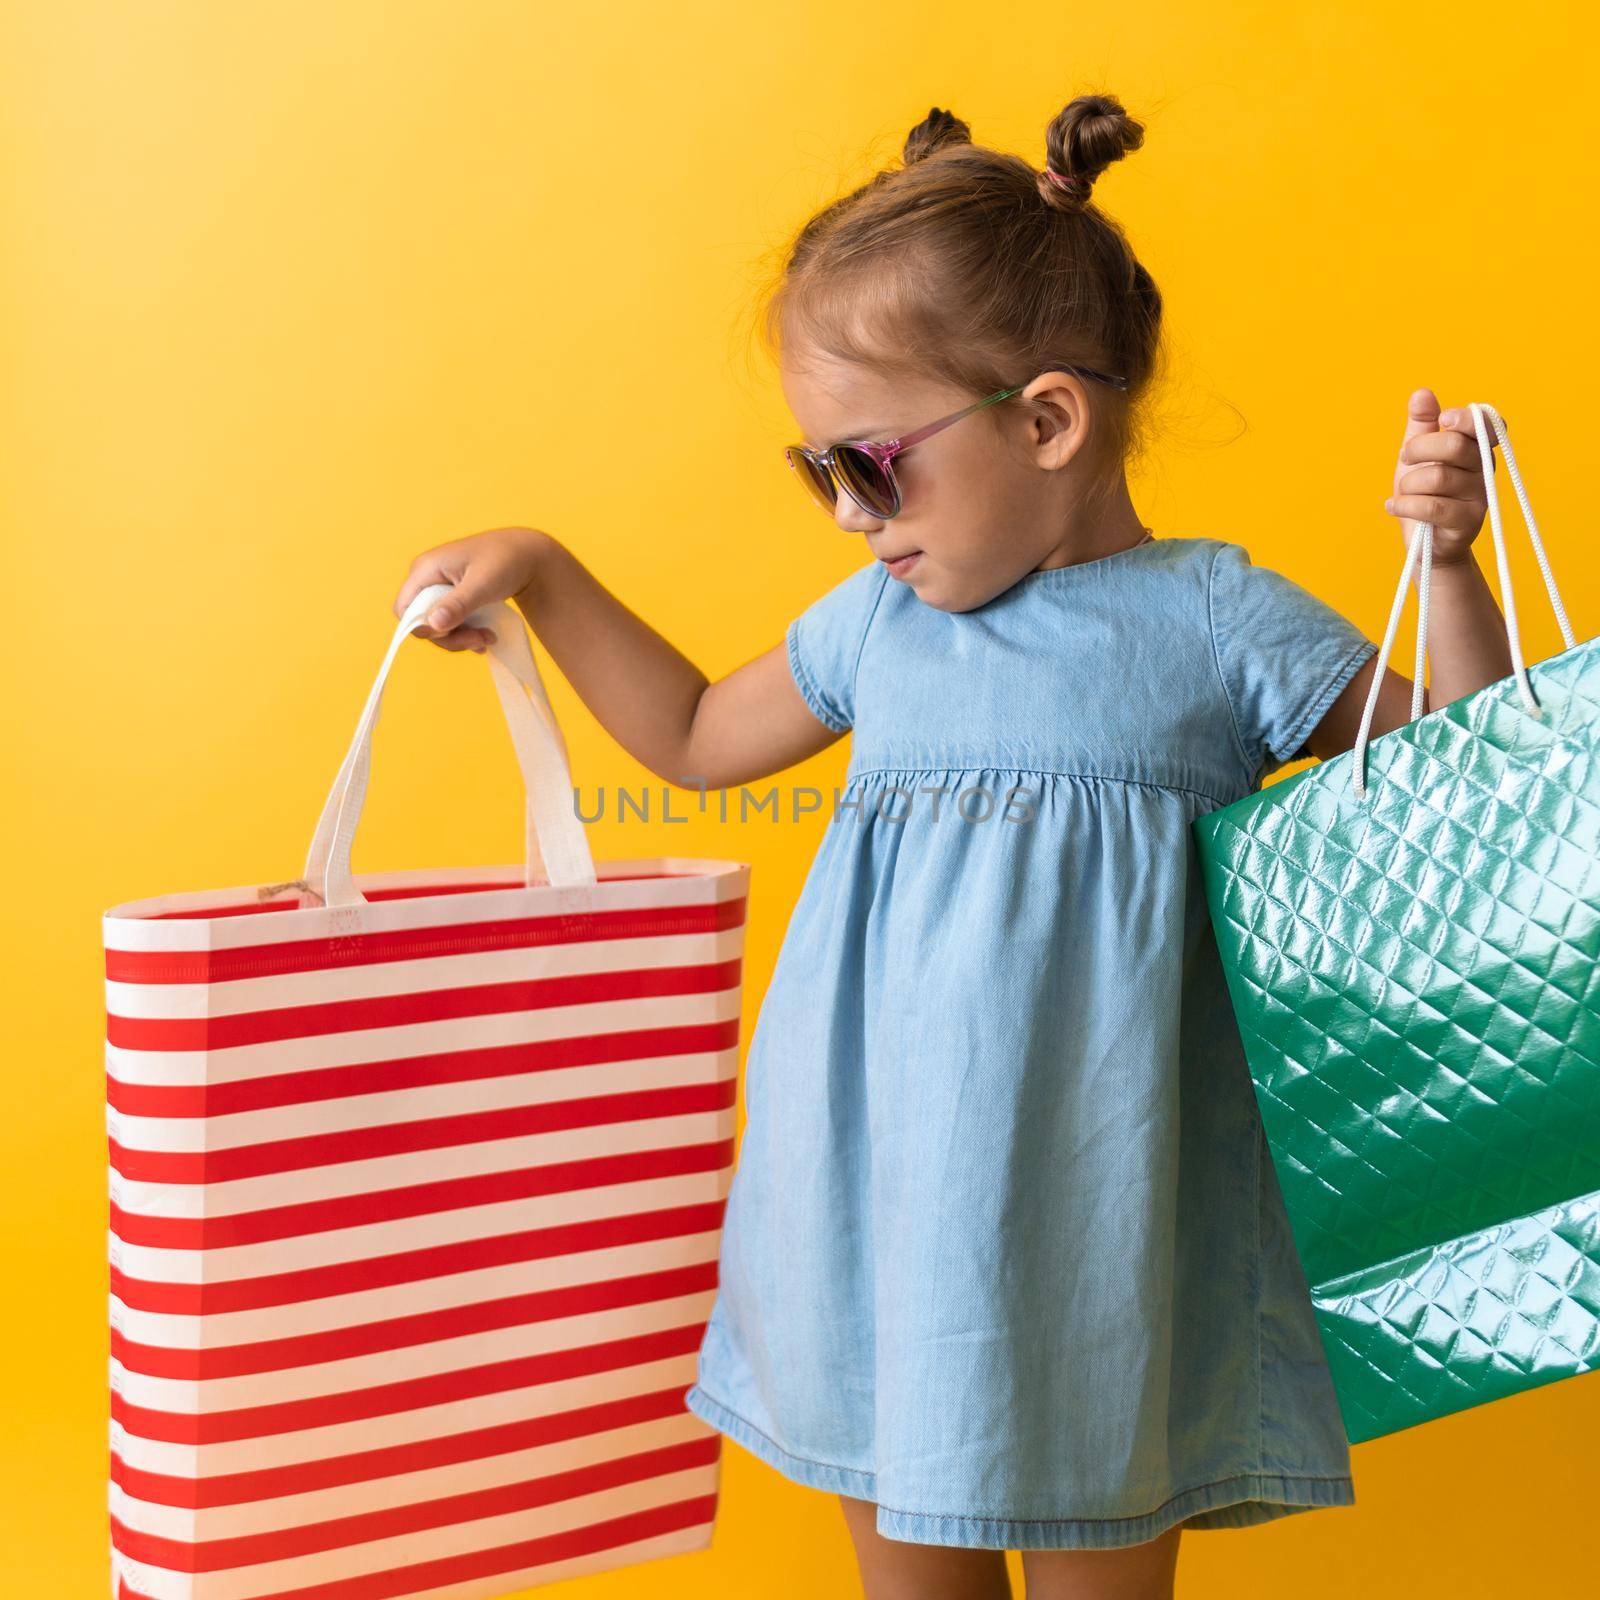 Square Portrait Beautiful Happy Little Preschool Girl In Sunglasses Smiling Cheerful Holding Cardboard Bags Isolated On Orange Yellow background. Happiness, Consumerism, Sale People shopping Concept by mytrykau